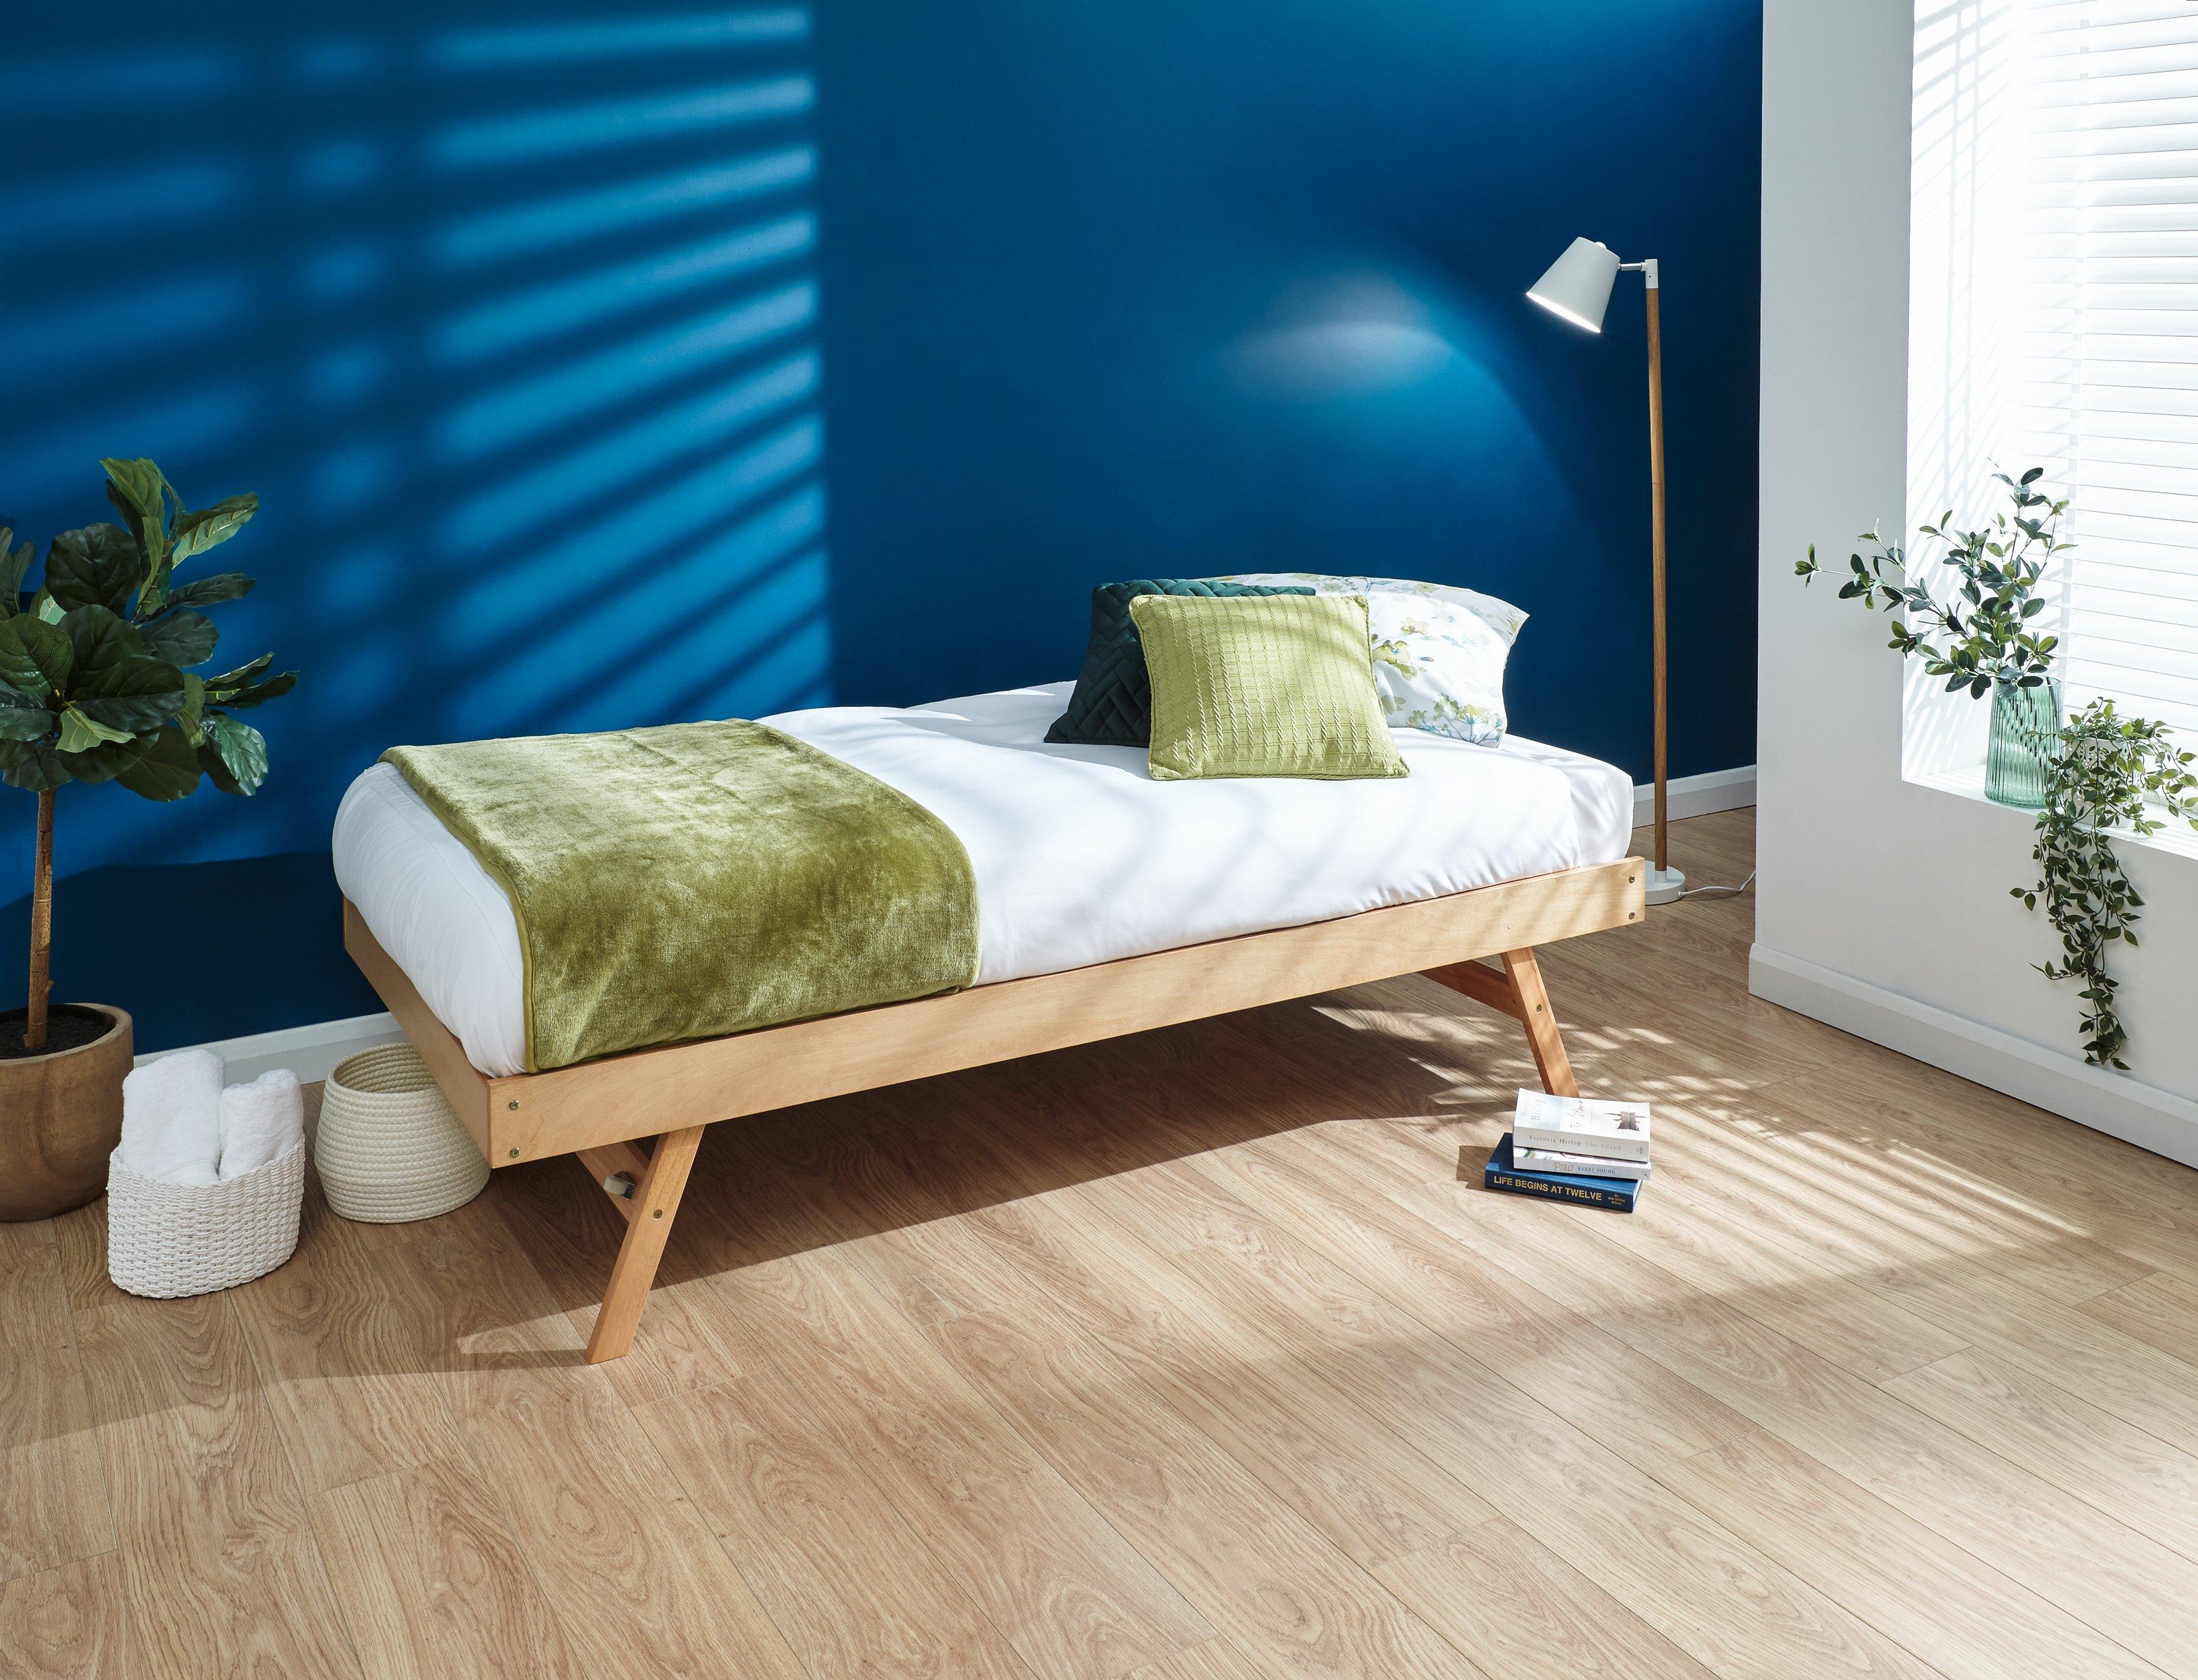 Madrid Wooden Trundle Bed